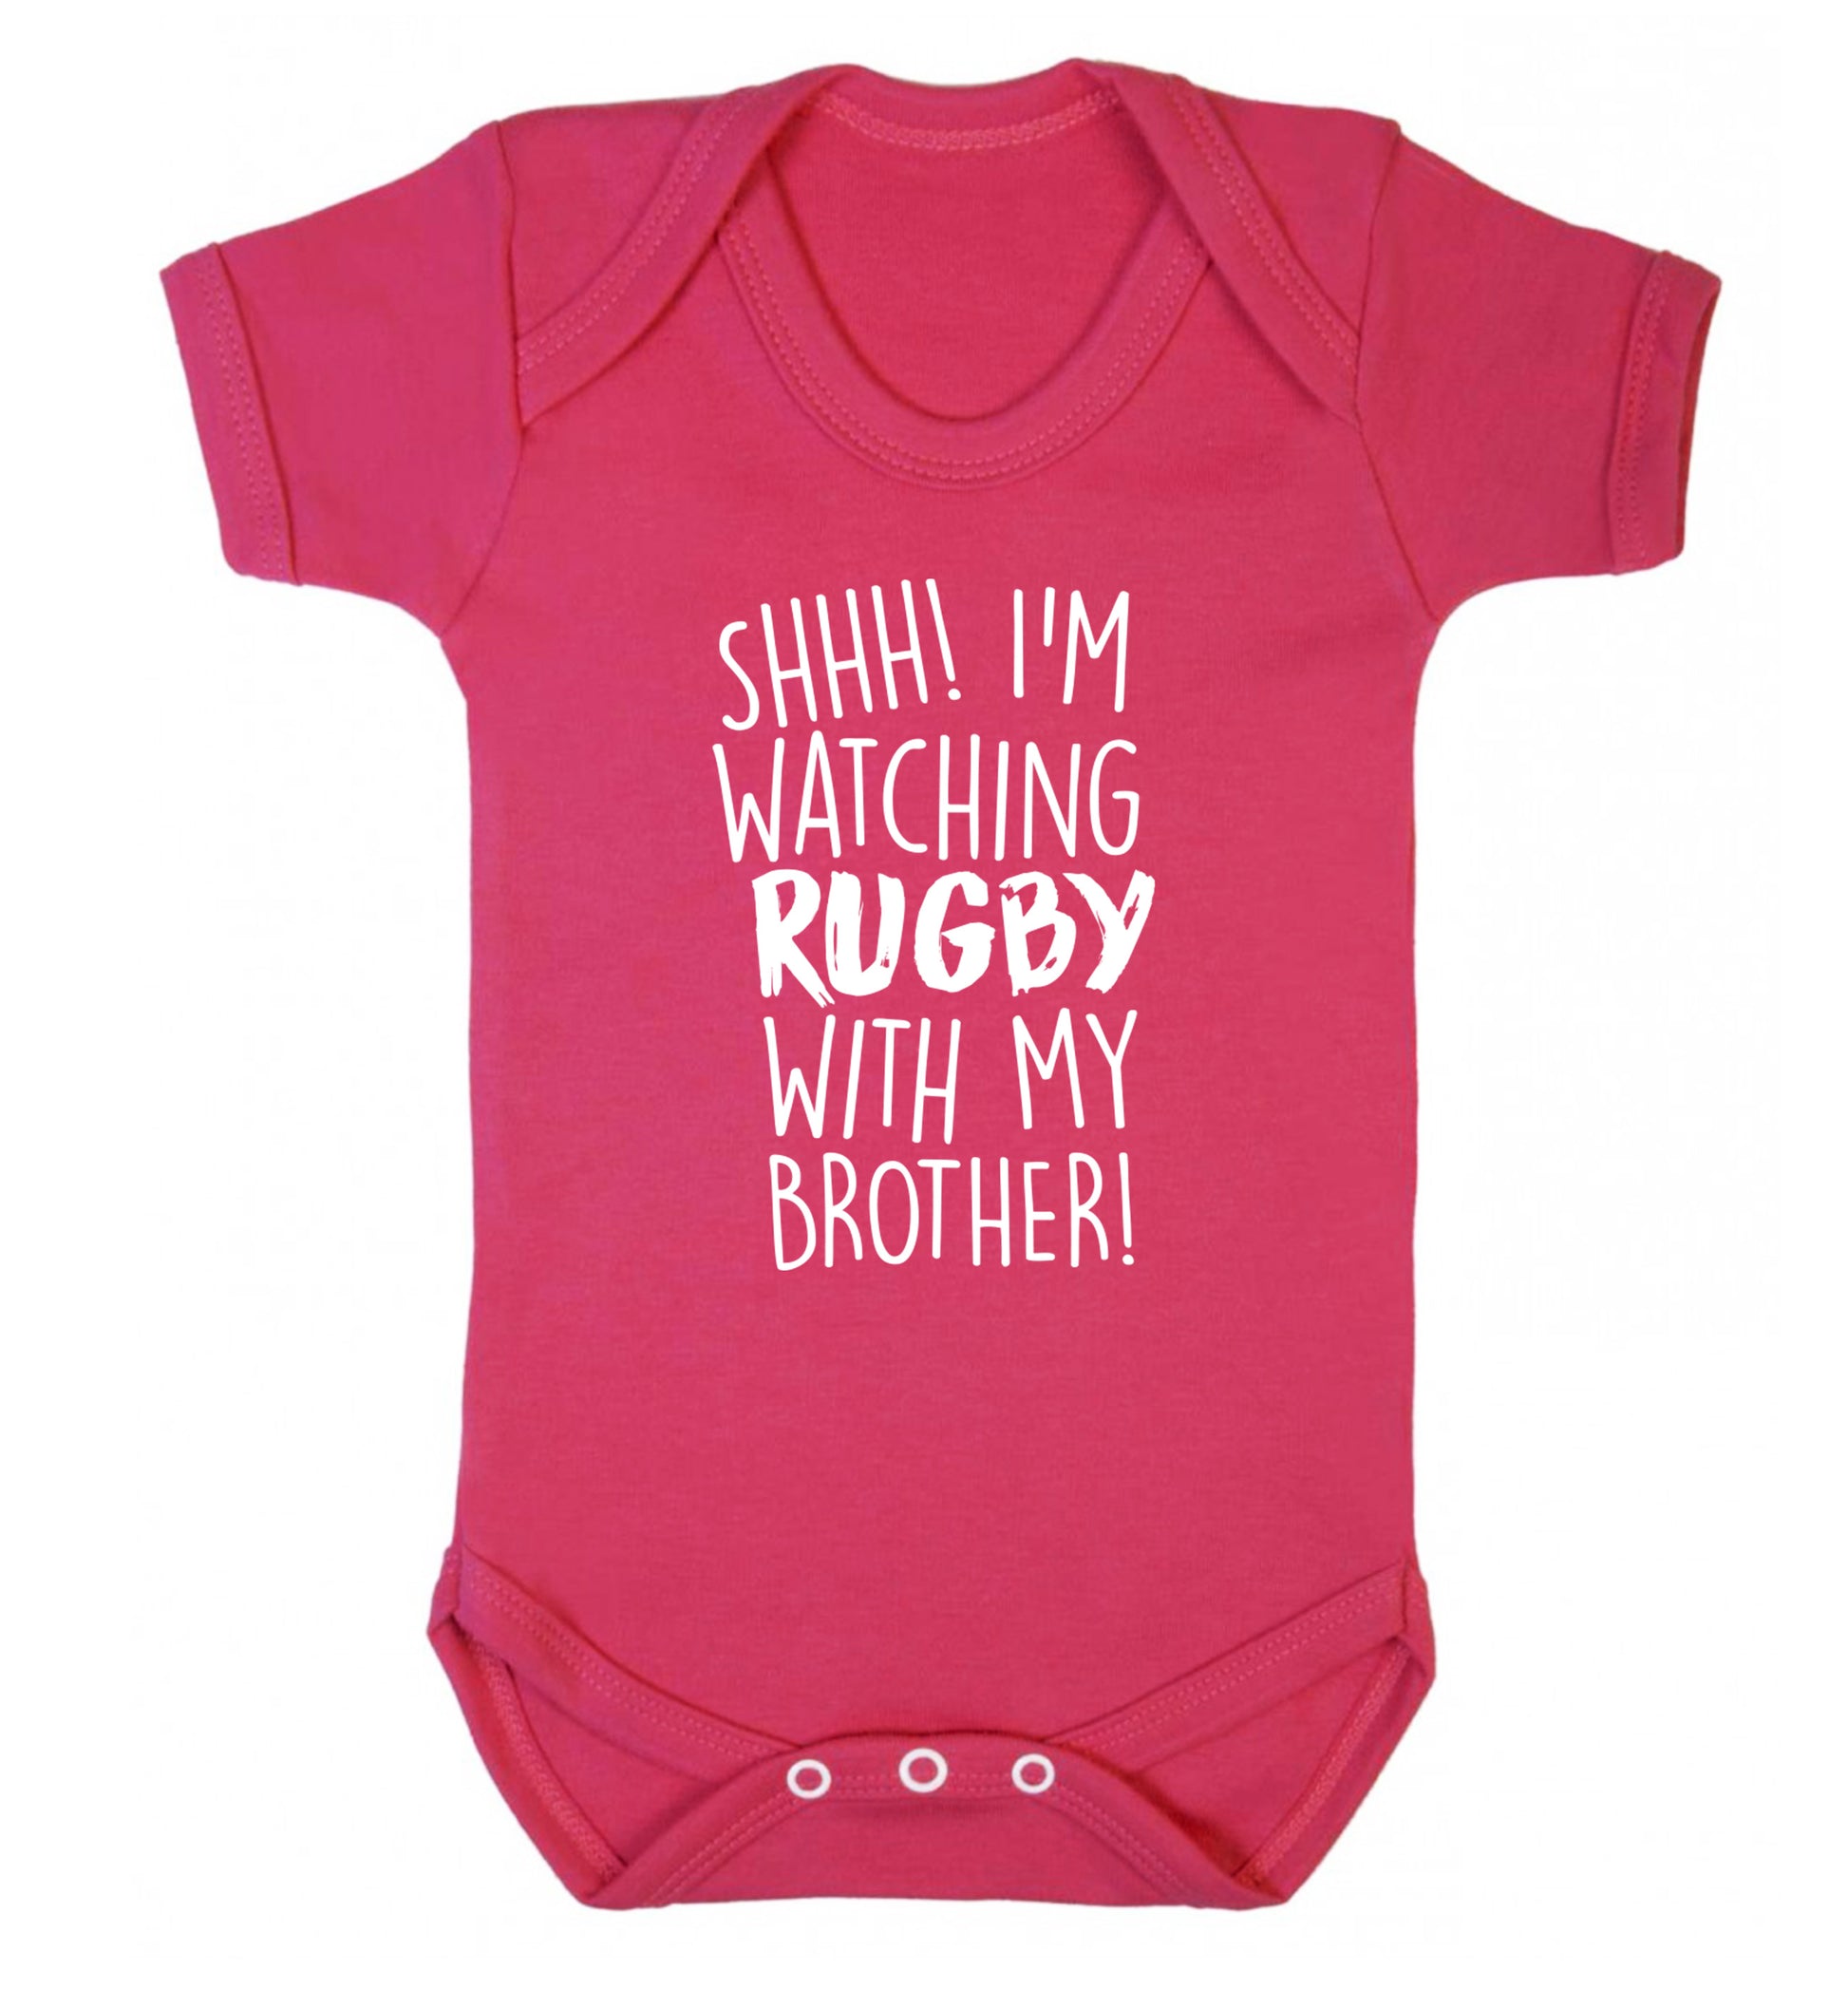 Shh... I'm watching rugby with my brother Baby Vest dark pink 18-24 months